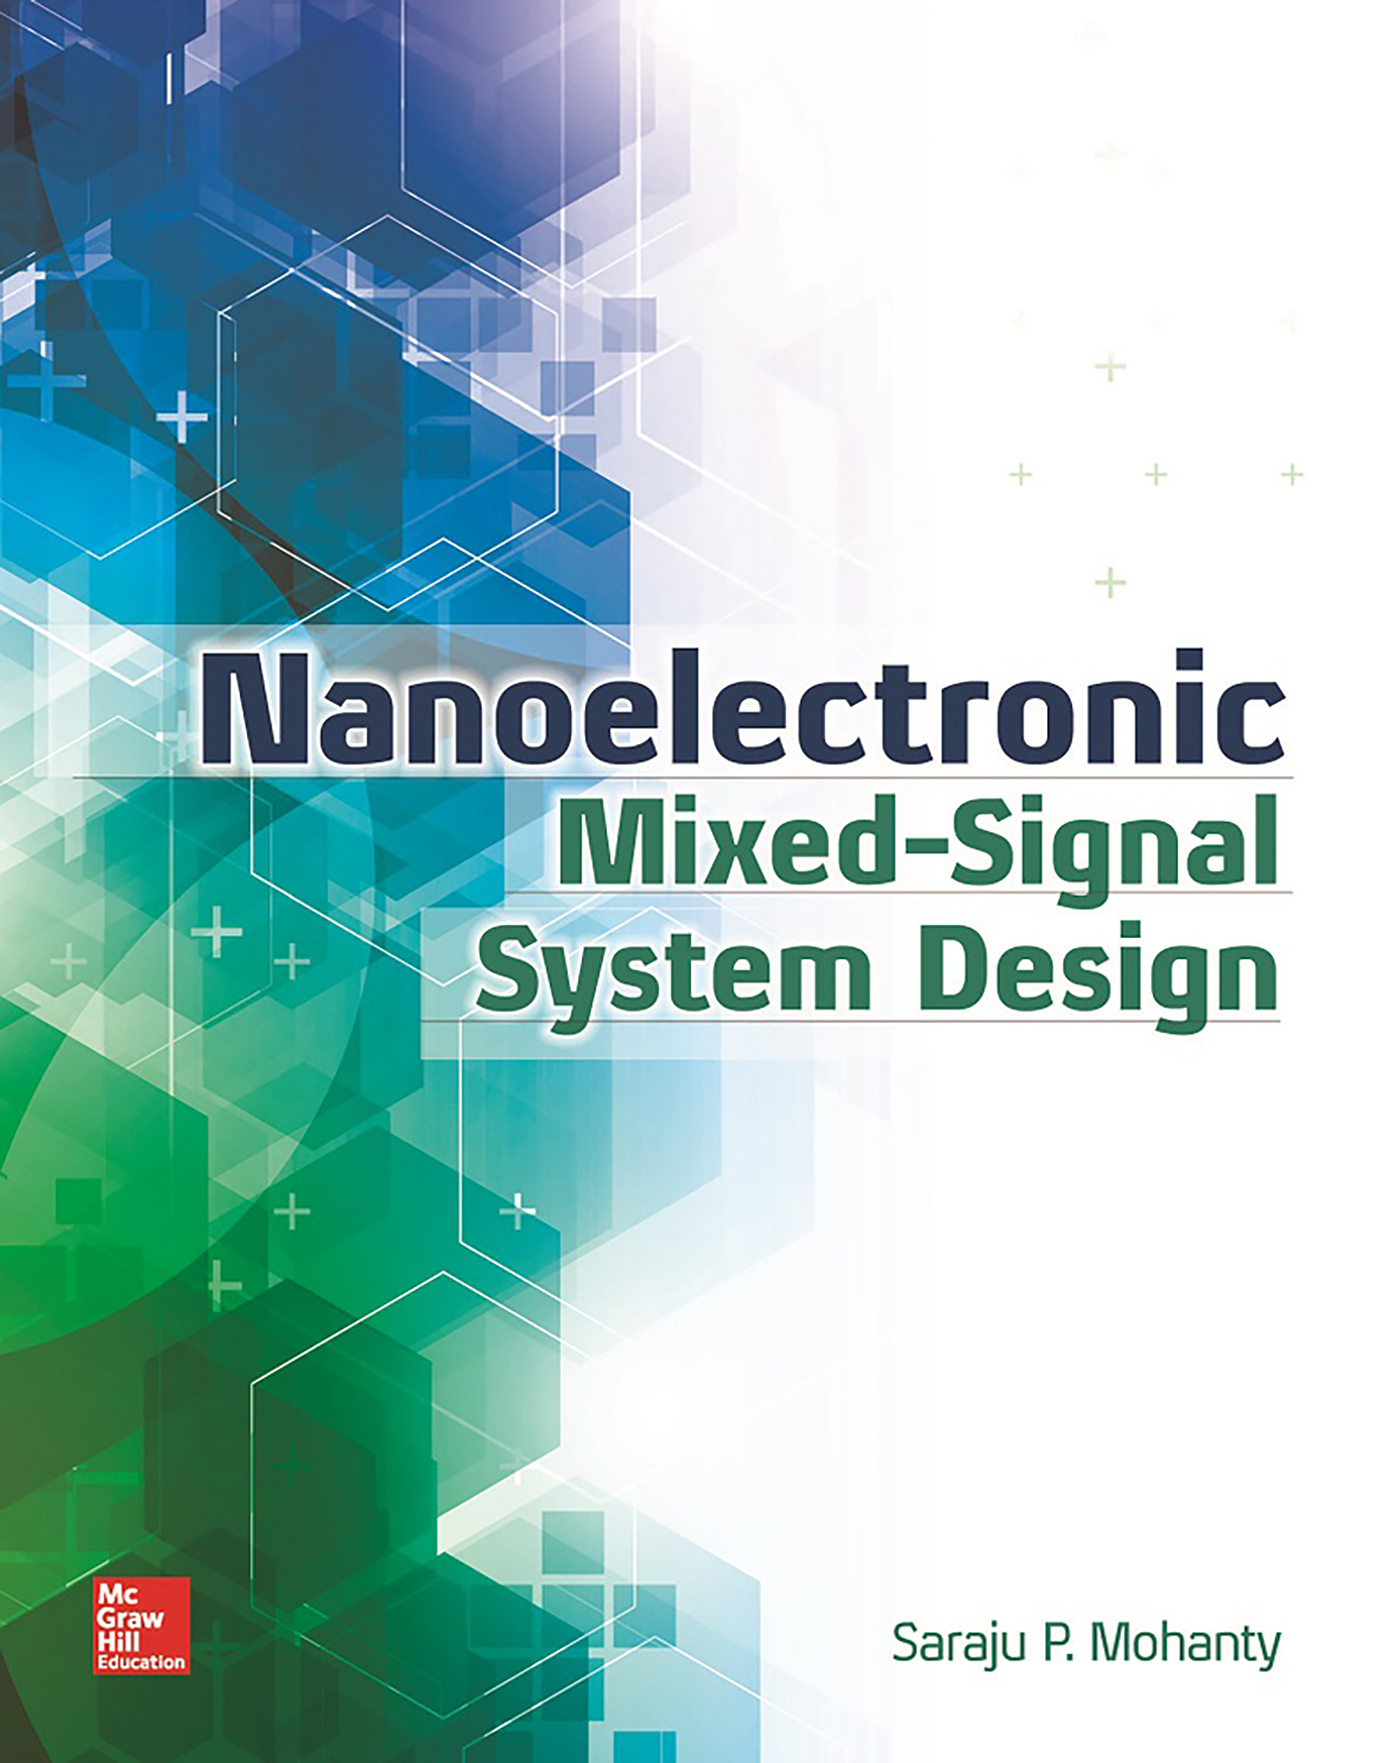 Nanoelectronic Mixed-Signal System Design, McGraw-Hill, 2015